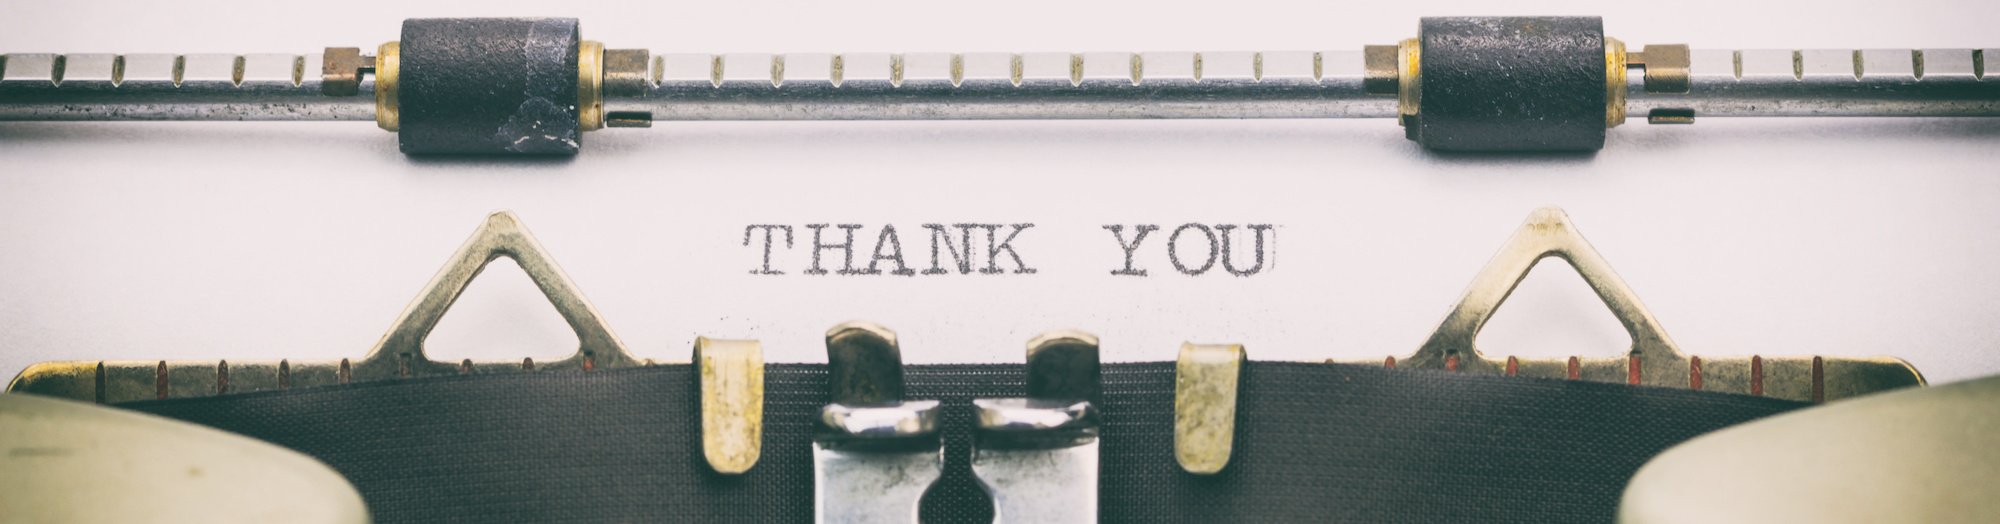 How to Thank Clients and Customers For Their Business